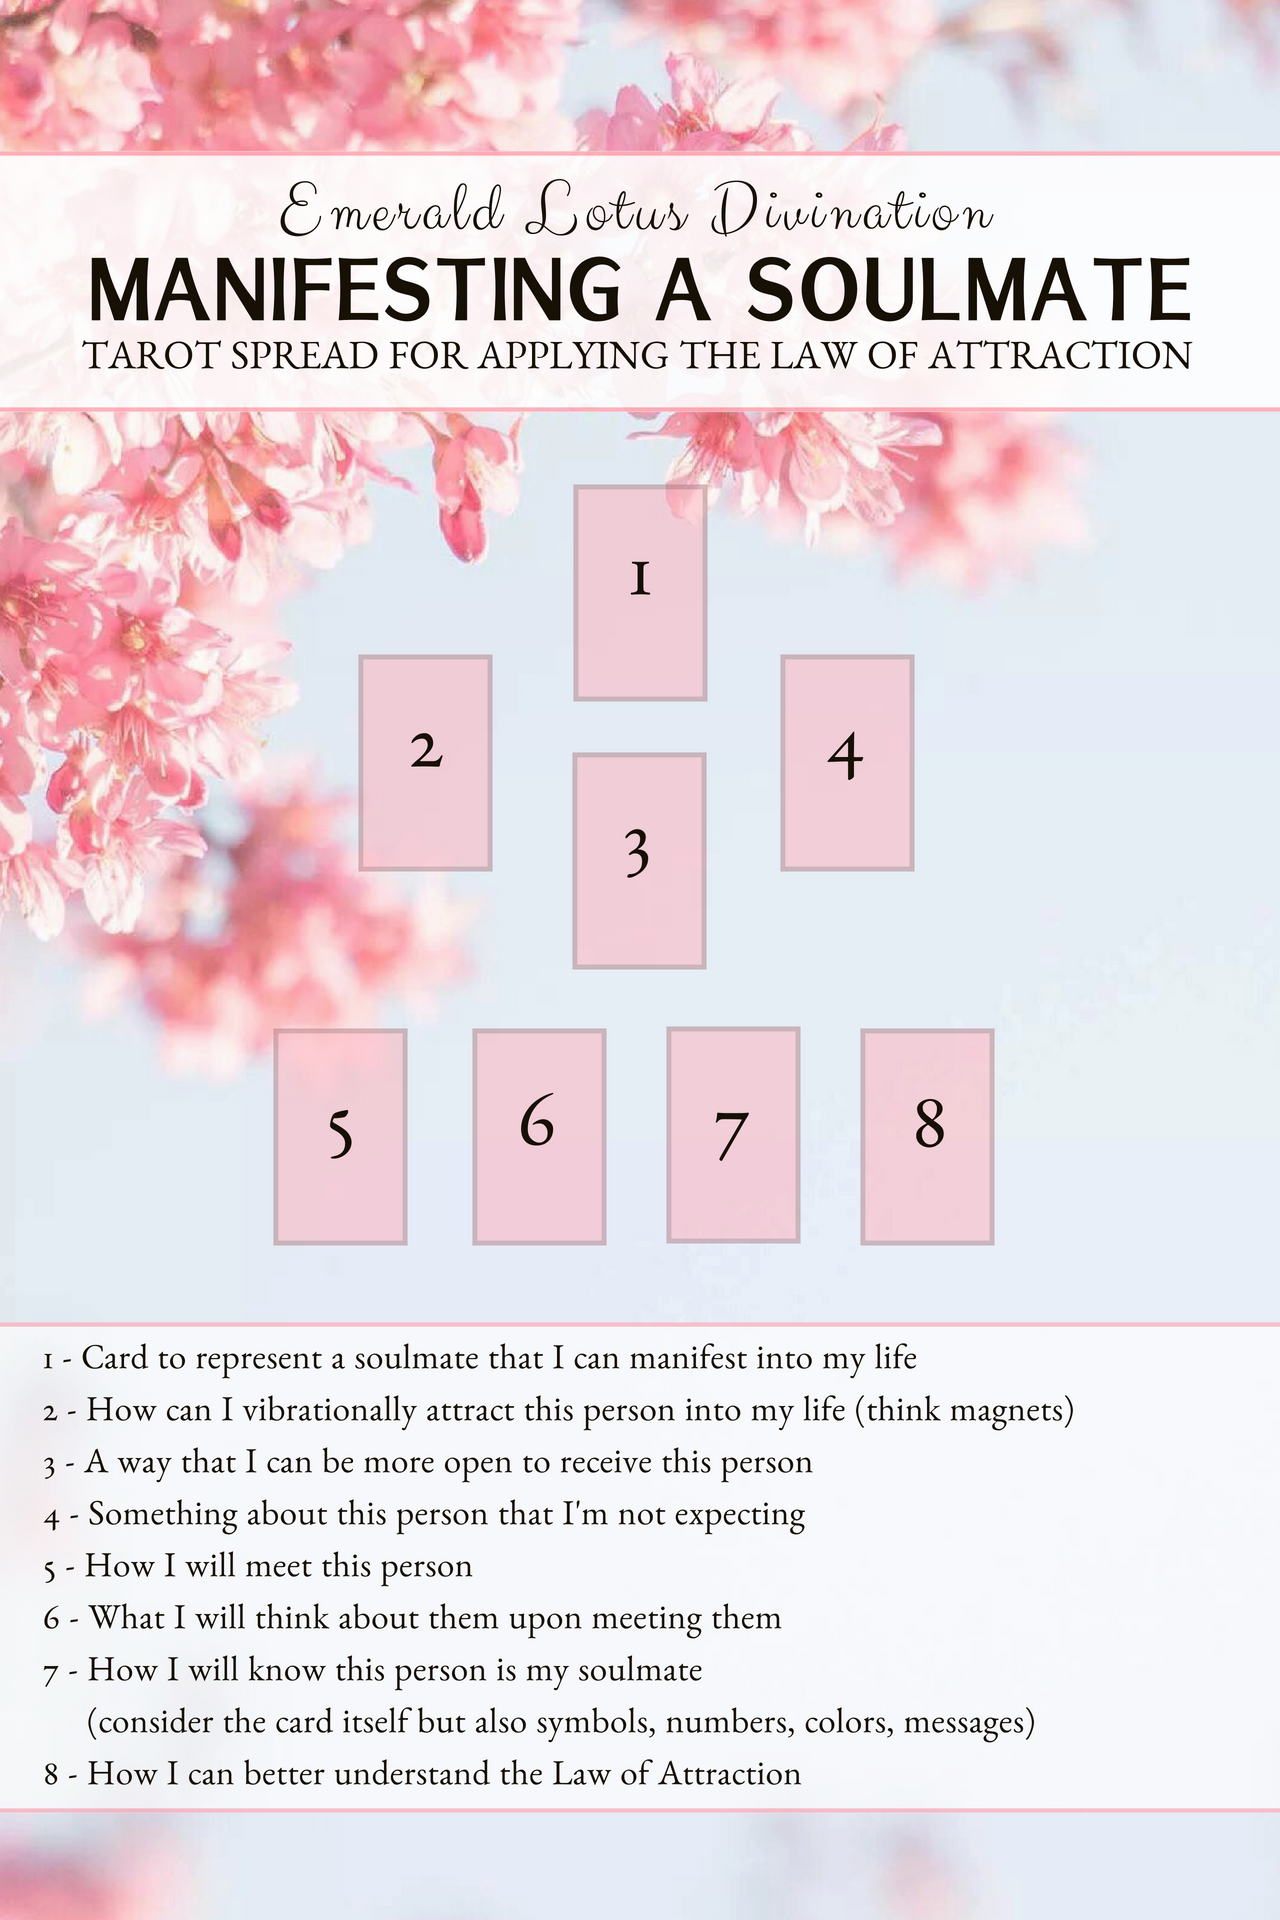 5 Tips For Manifesting A Soulmate And Tarot Spread — Emerald Lotus